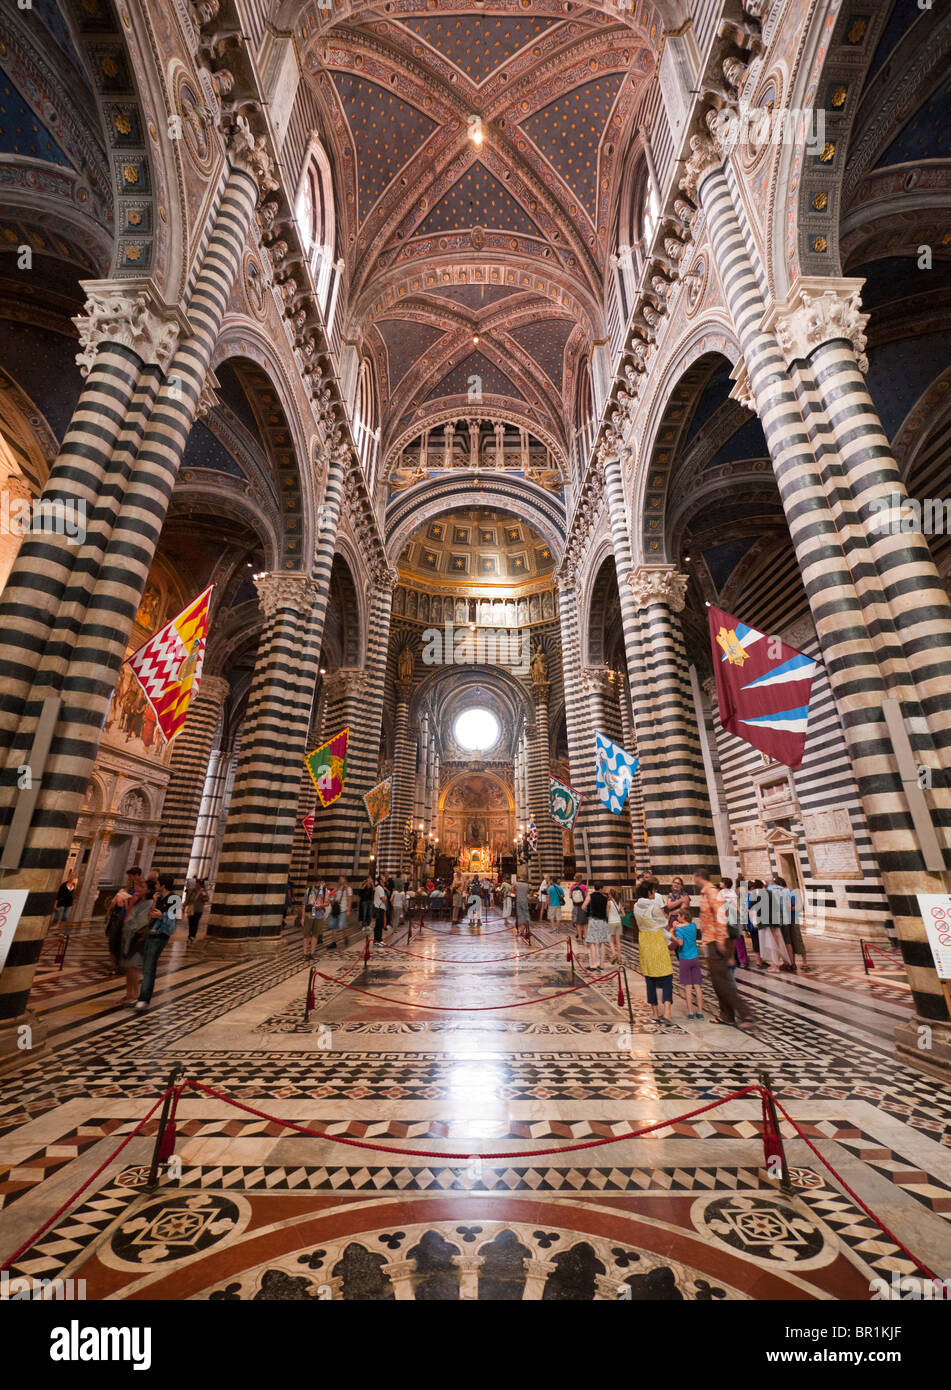 Interior view of the Siena cathedral in Tuscany, Italy. Stock Photo